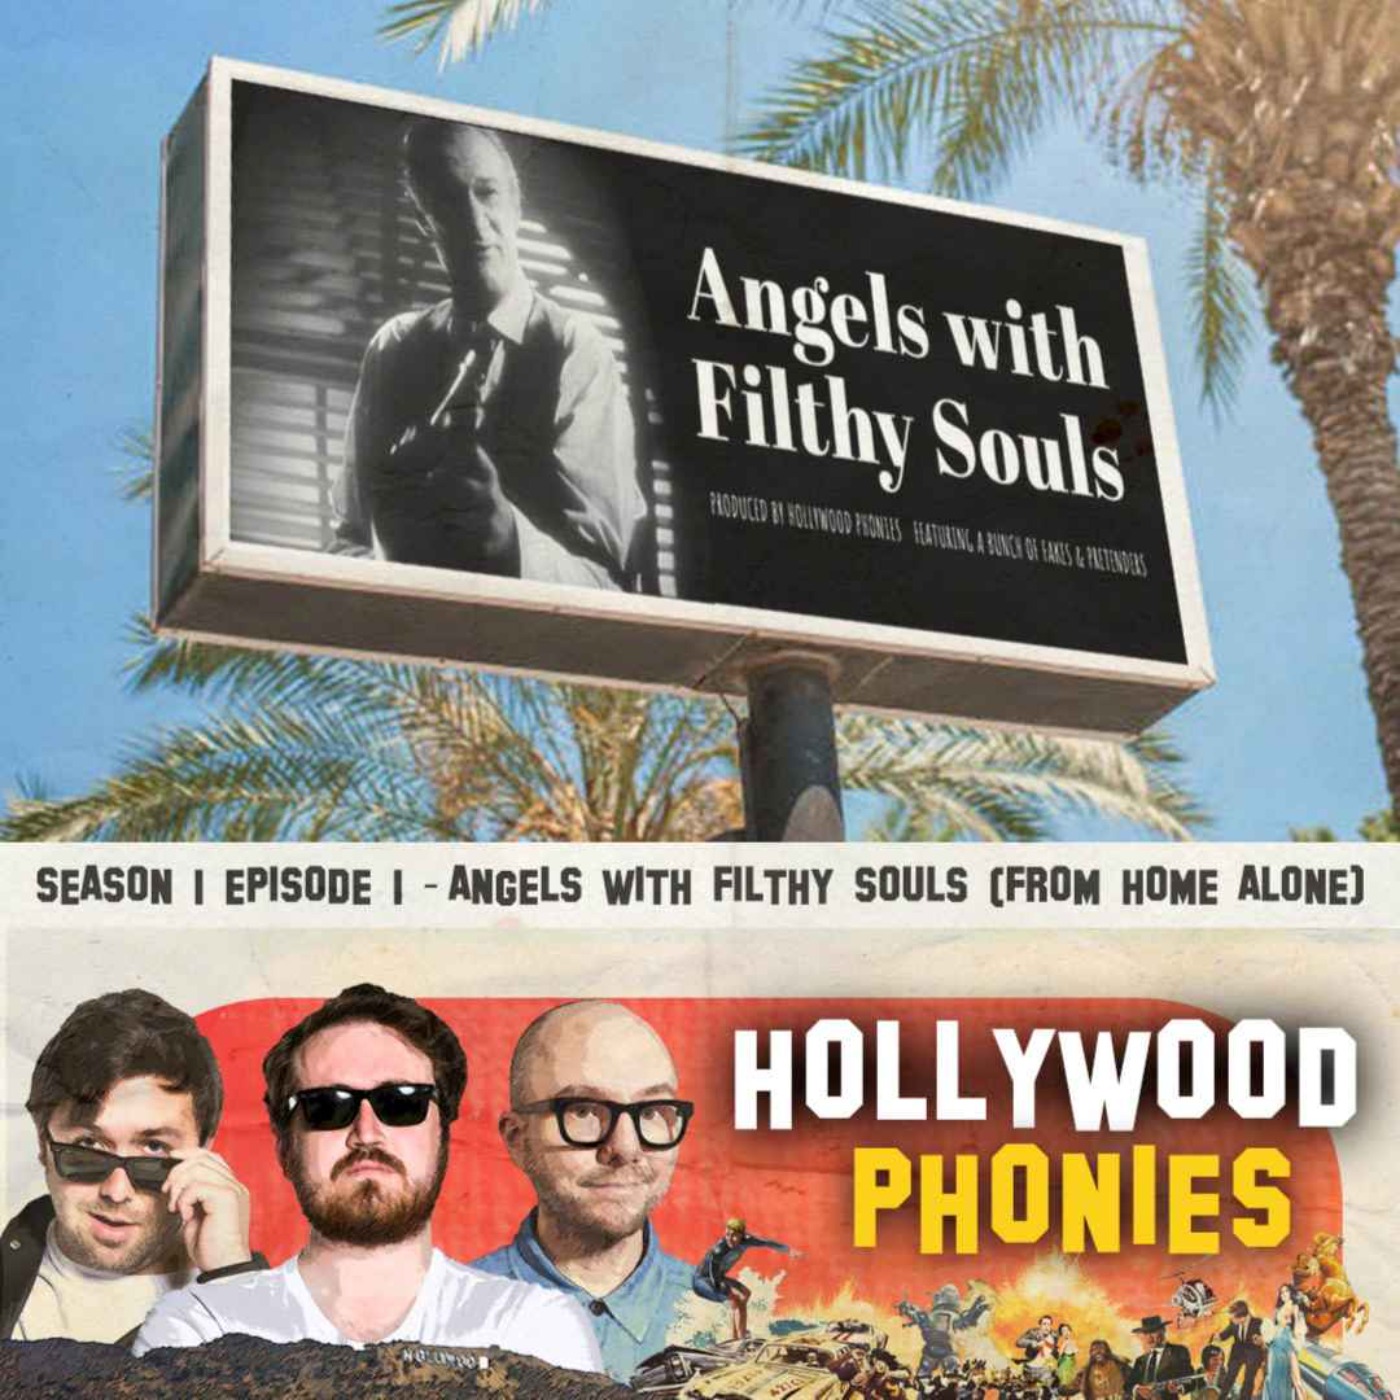 'Angels with Filthy Souls' (from 'Home Alone')